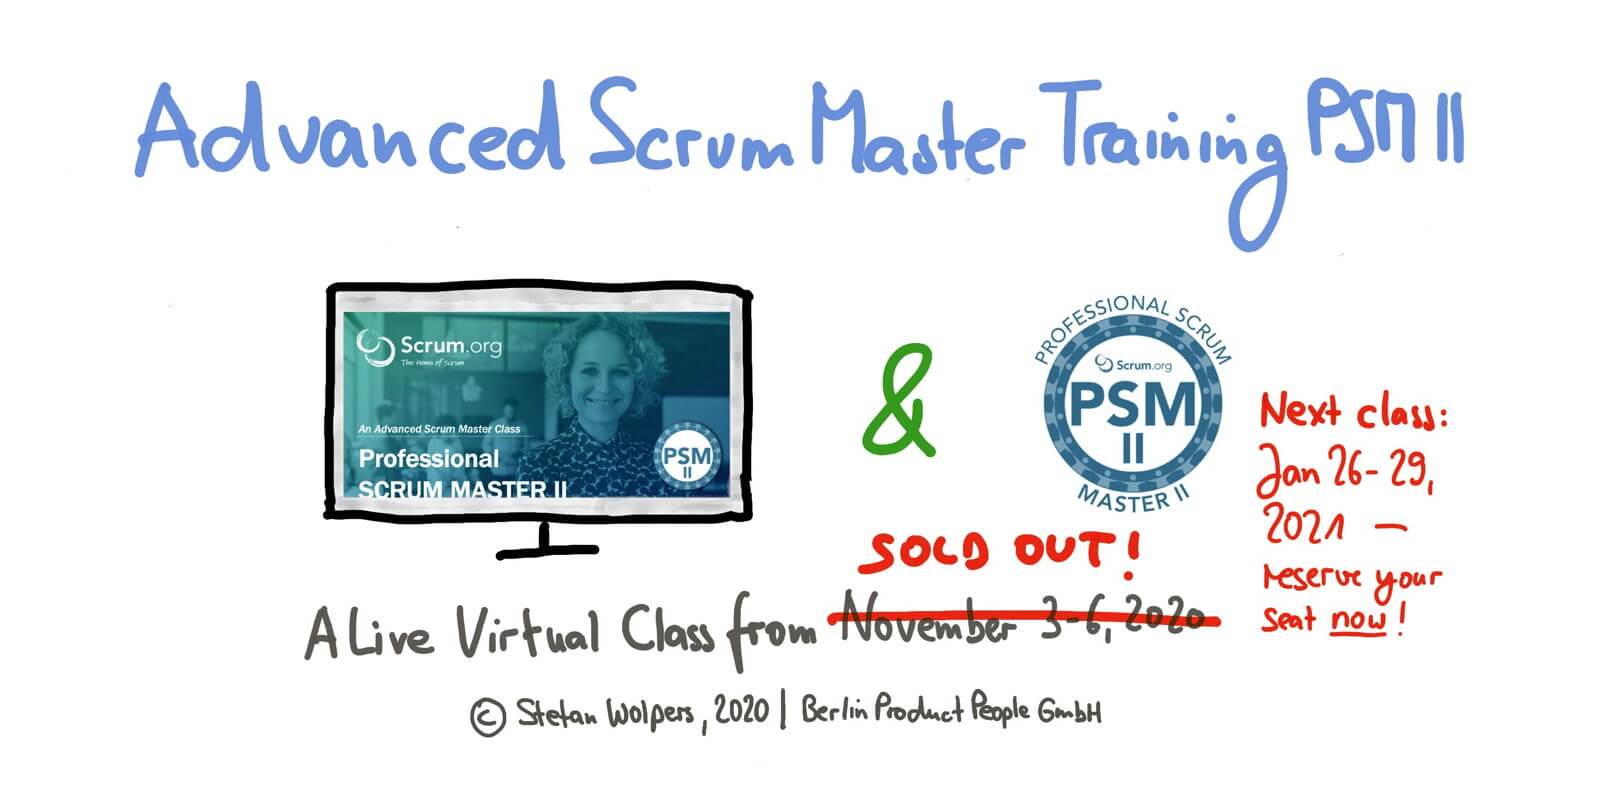 Sold out: Advanced Professional Scrum Master Online Training w/ PSM II Certificate — November 3-6, 2020 — Berlin Product People GmbH